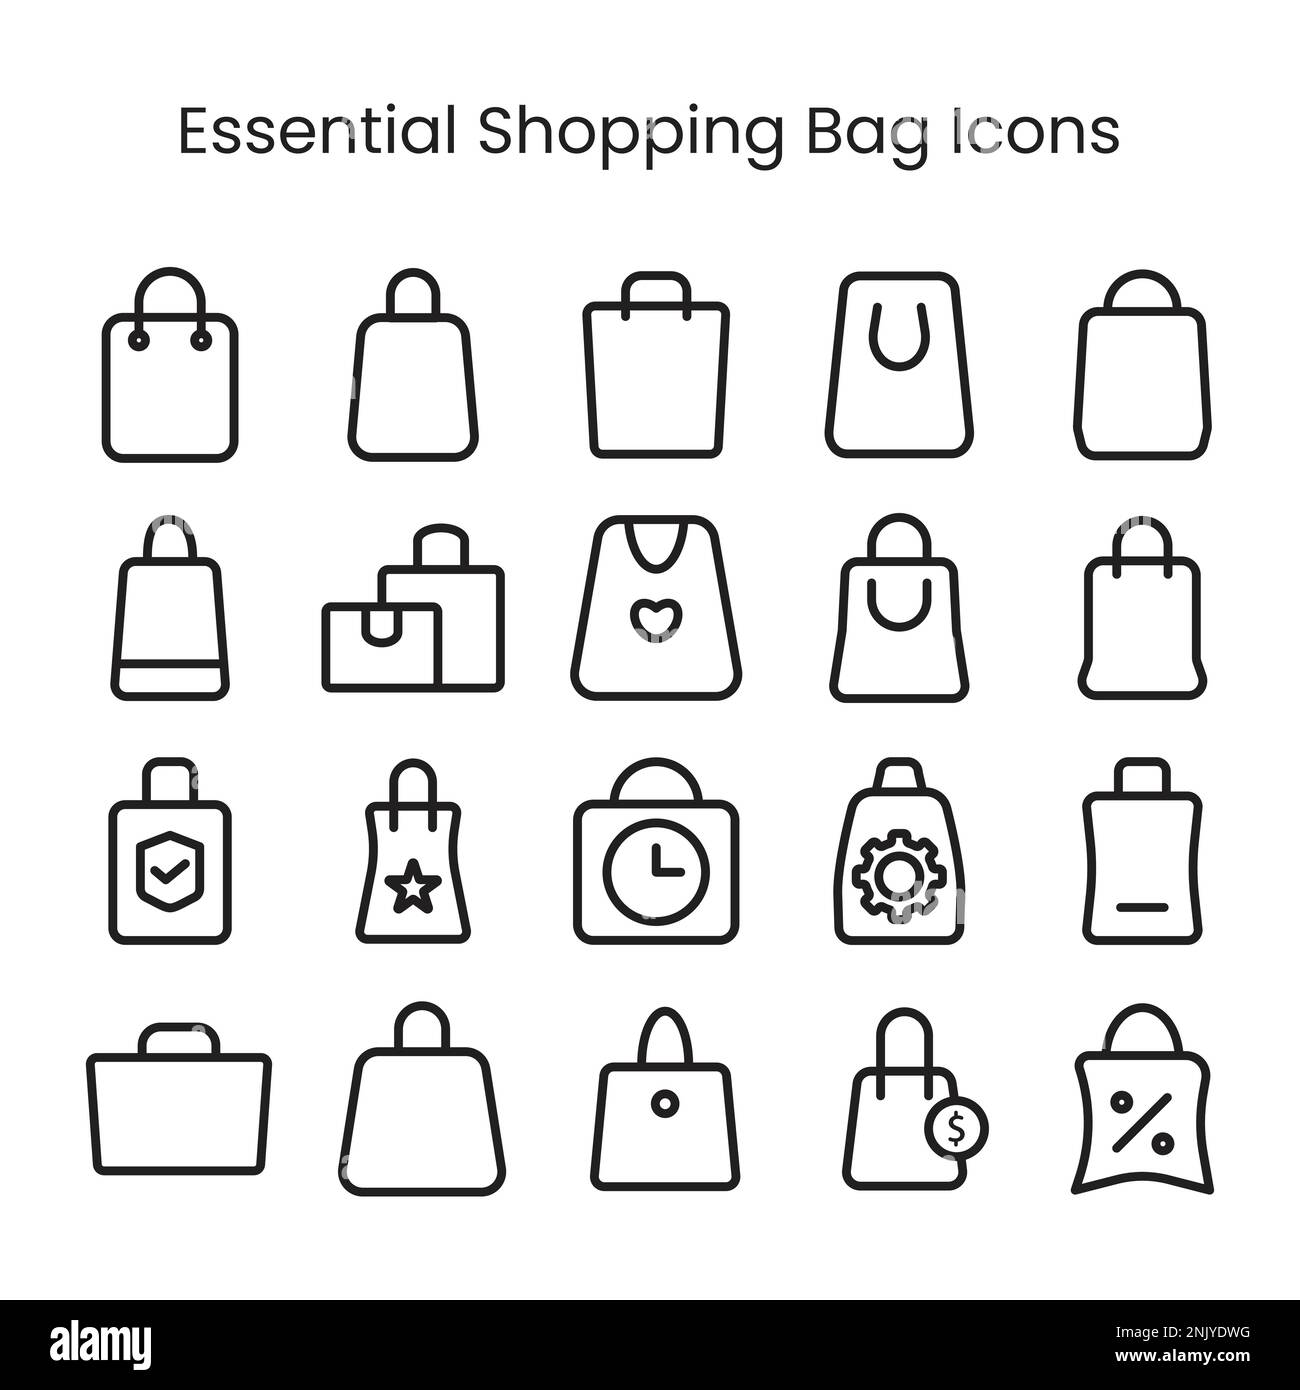 shopping bag icons set for ecommerce and business products, retail shop, online shopping, line style shopping bag set icons Stock Vector